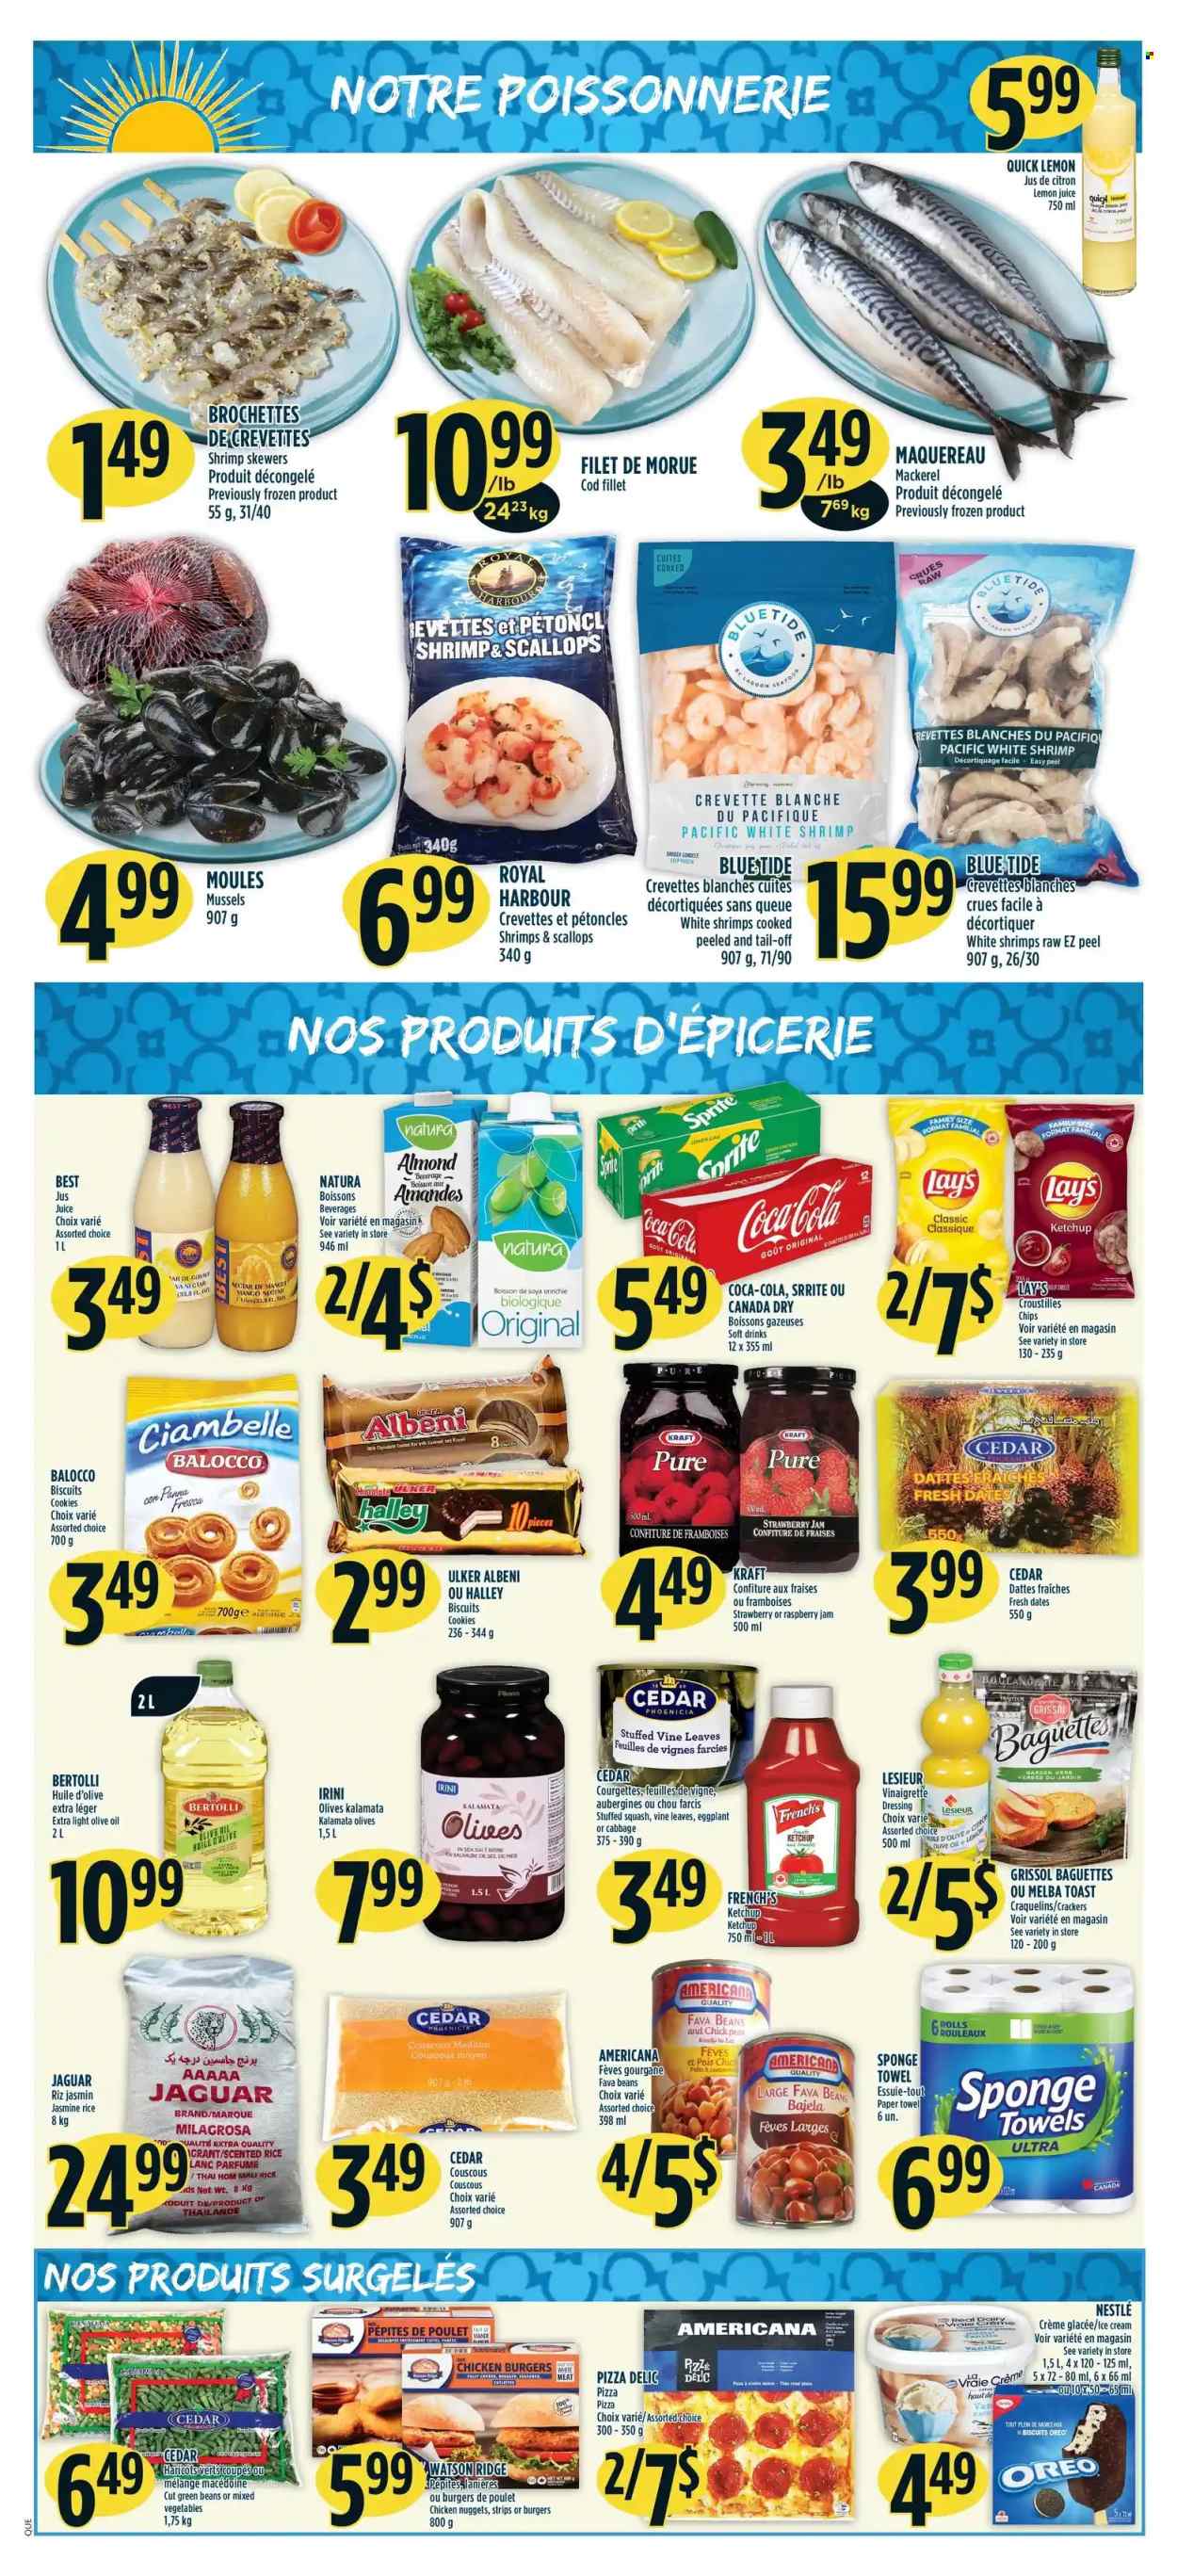 thumbnail - Adonis Flyer - May 19, 2022 - May 25, 2022 - Sales products - cabbage, fava beans, green beans, eggplant, fresh dates, cod, mackerel, mussels, scallops, shrimps, pizza, nuggets, chicken nuggets, Kraft®, Bertolli, ice cream, mixed vegetables, strips, cookies, crackers, biscuit, Lay’s, strawberry jam, rice, jasmine rice, vinaigrette dressing, dressing, olive oil, oil, raspberry jam, fruit jam, Canada Dry, Coca-Cola, Sprite, soft drink, lemon juice, paper towels, Tide, baguette, couscous, Nestlé, ketchup, olives, Oreo. Page 4.